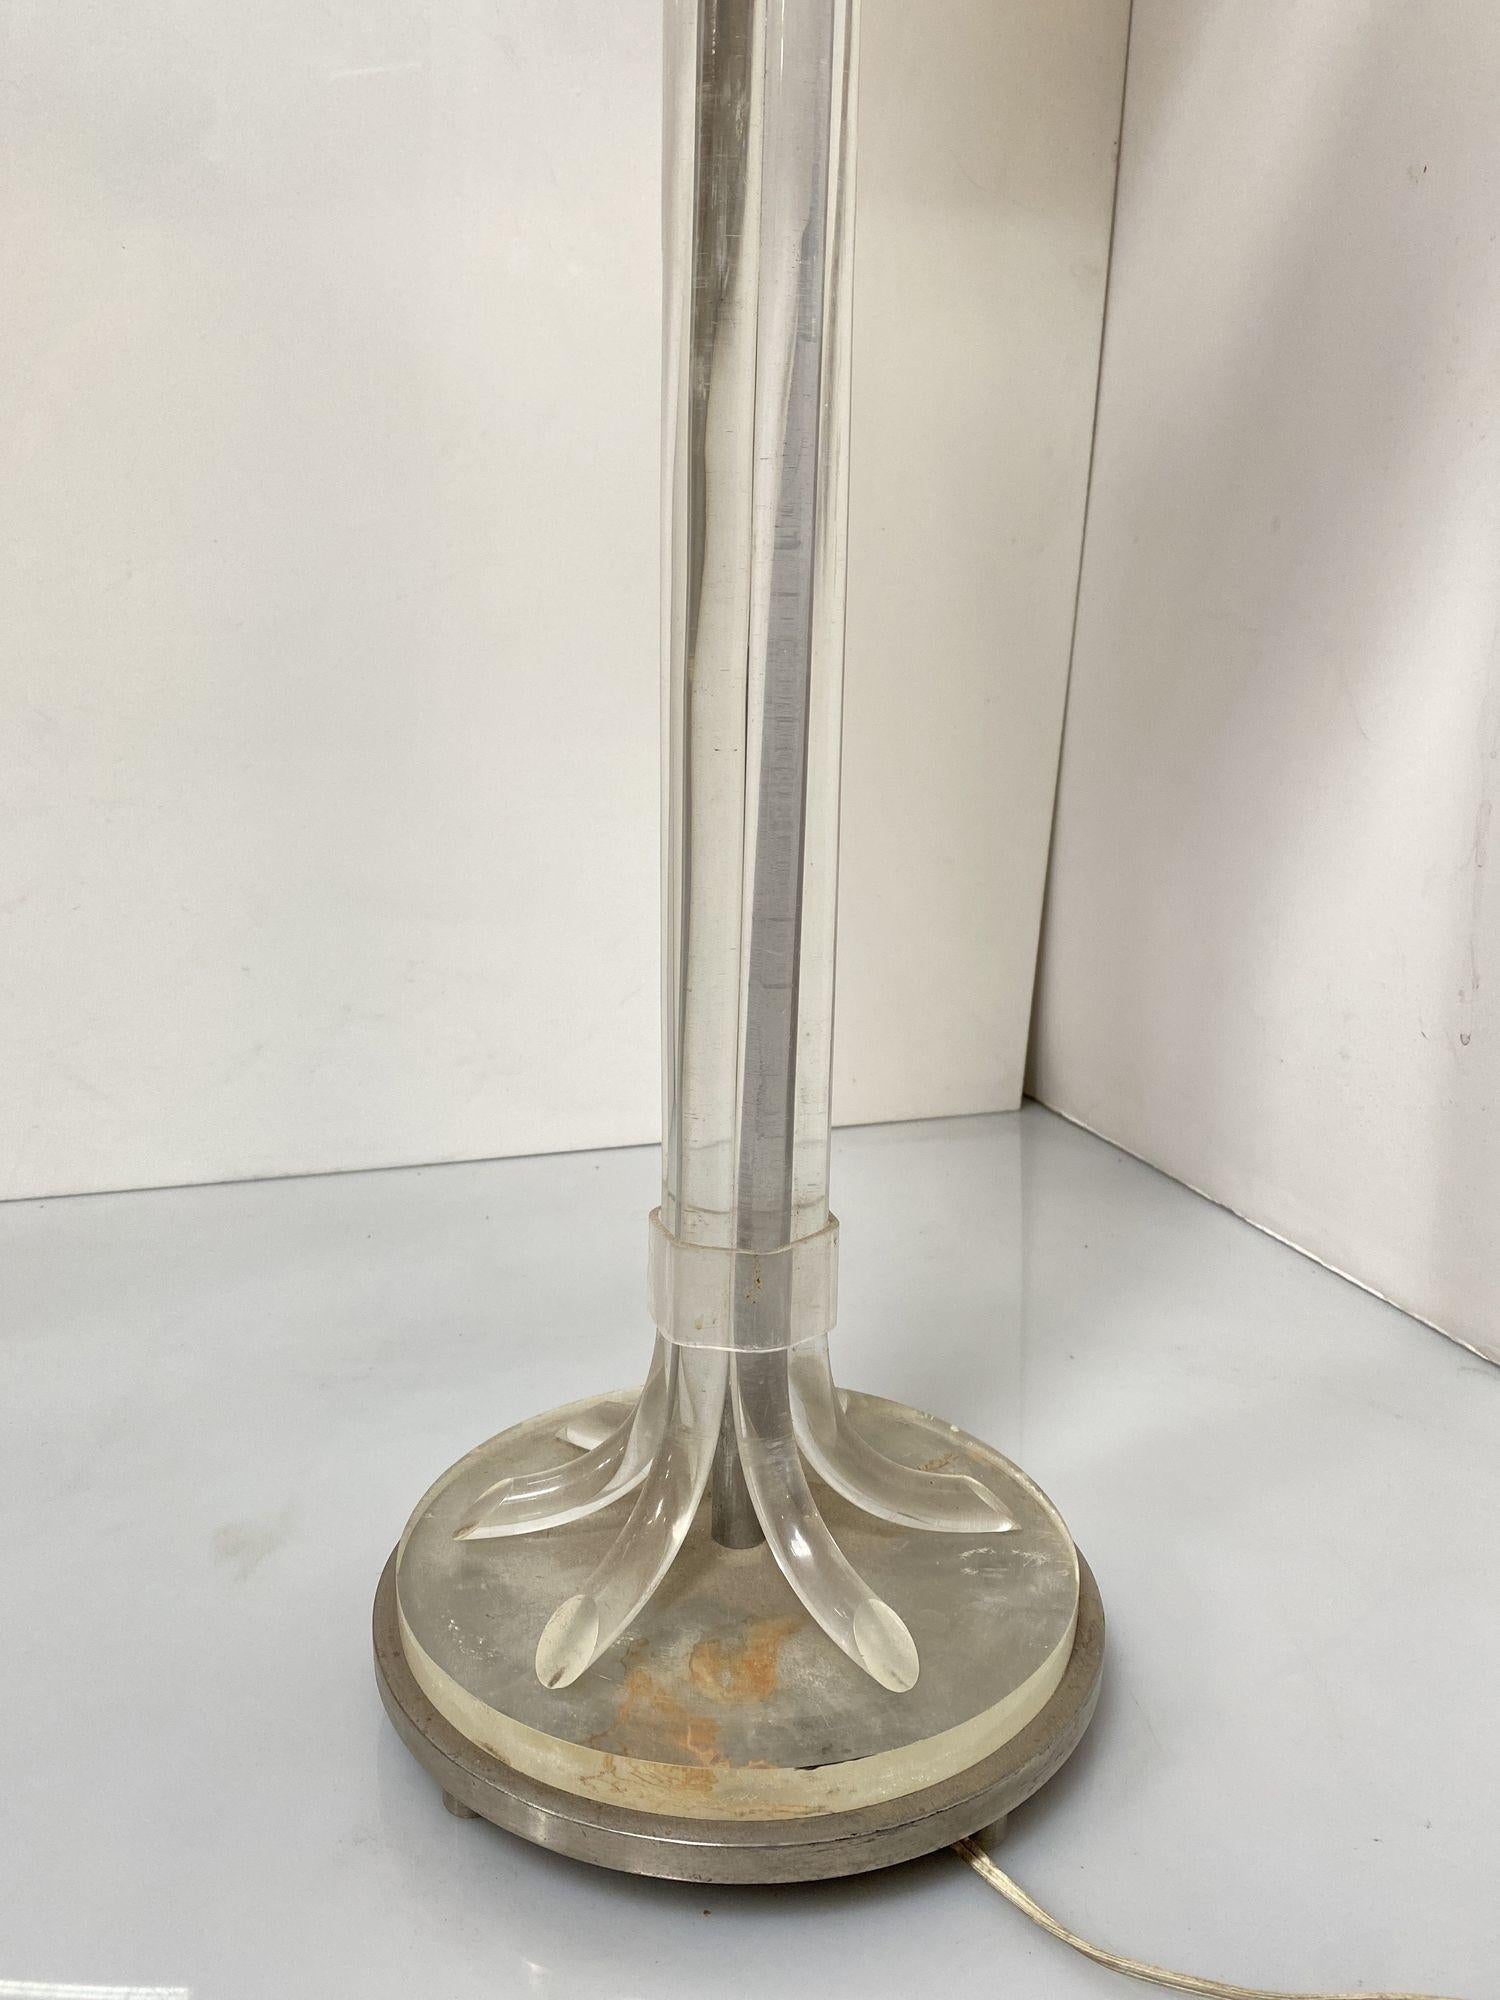 Hollywood Regency Lucite and Chrome Floor Lamp In Excellent Condition For Sale In Van Nuys, CA